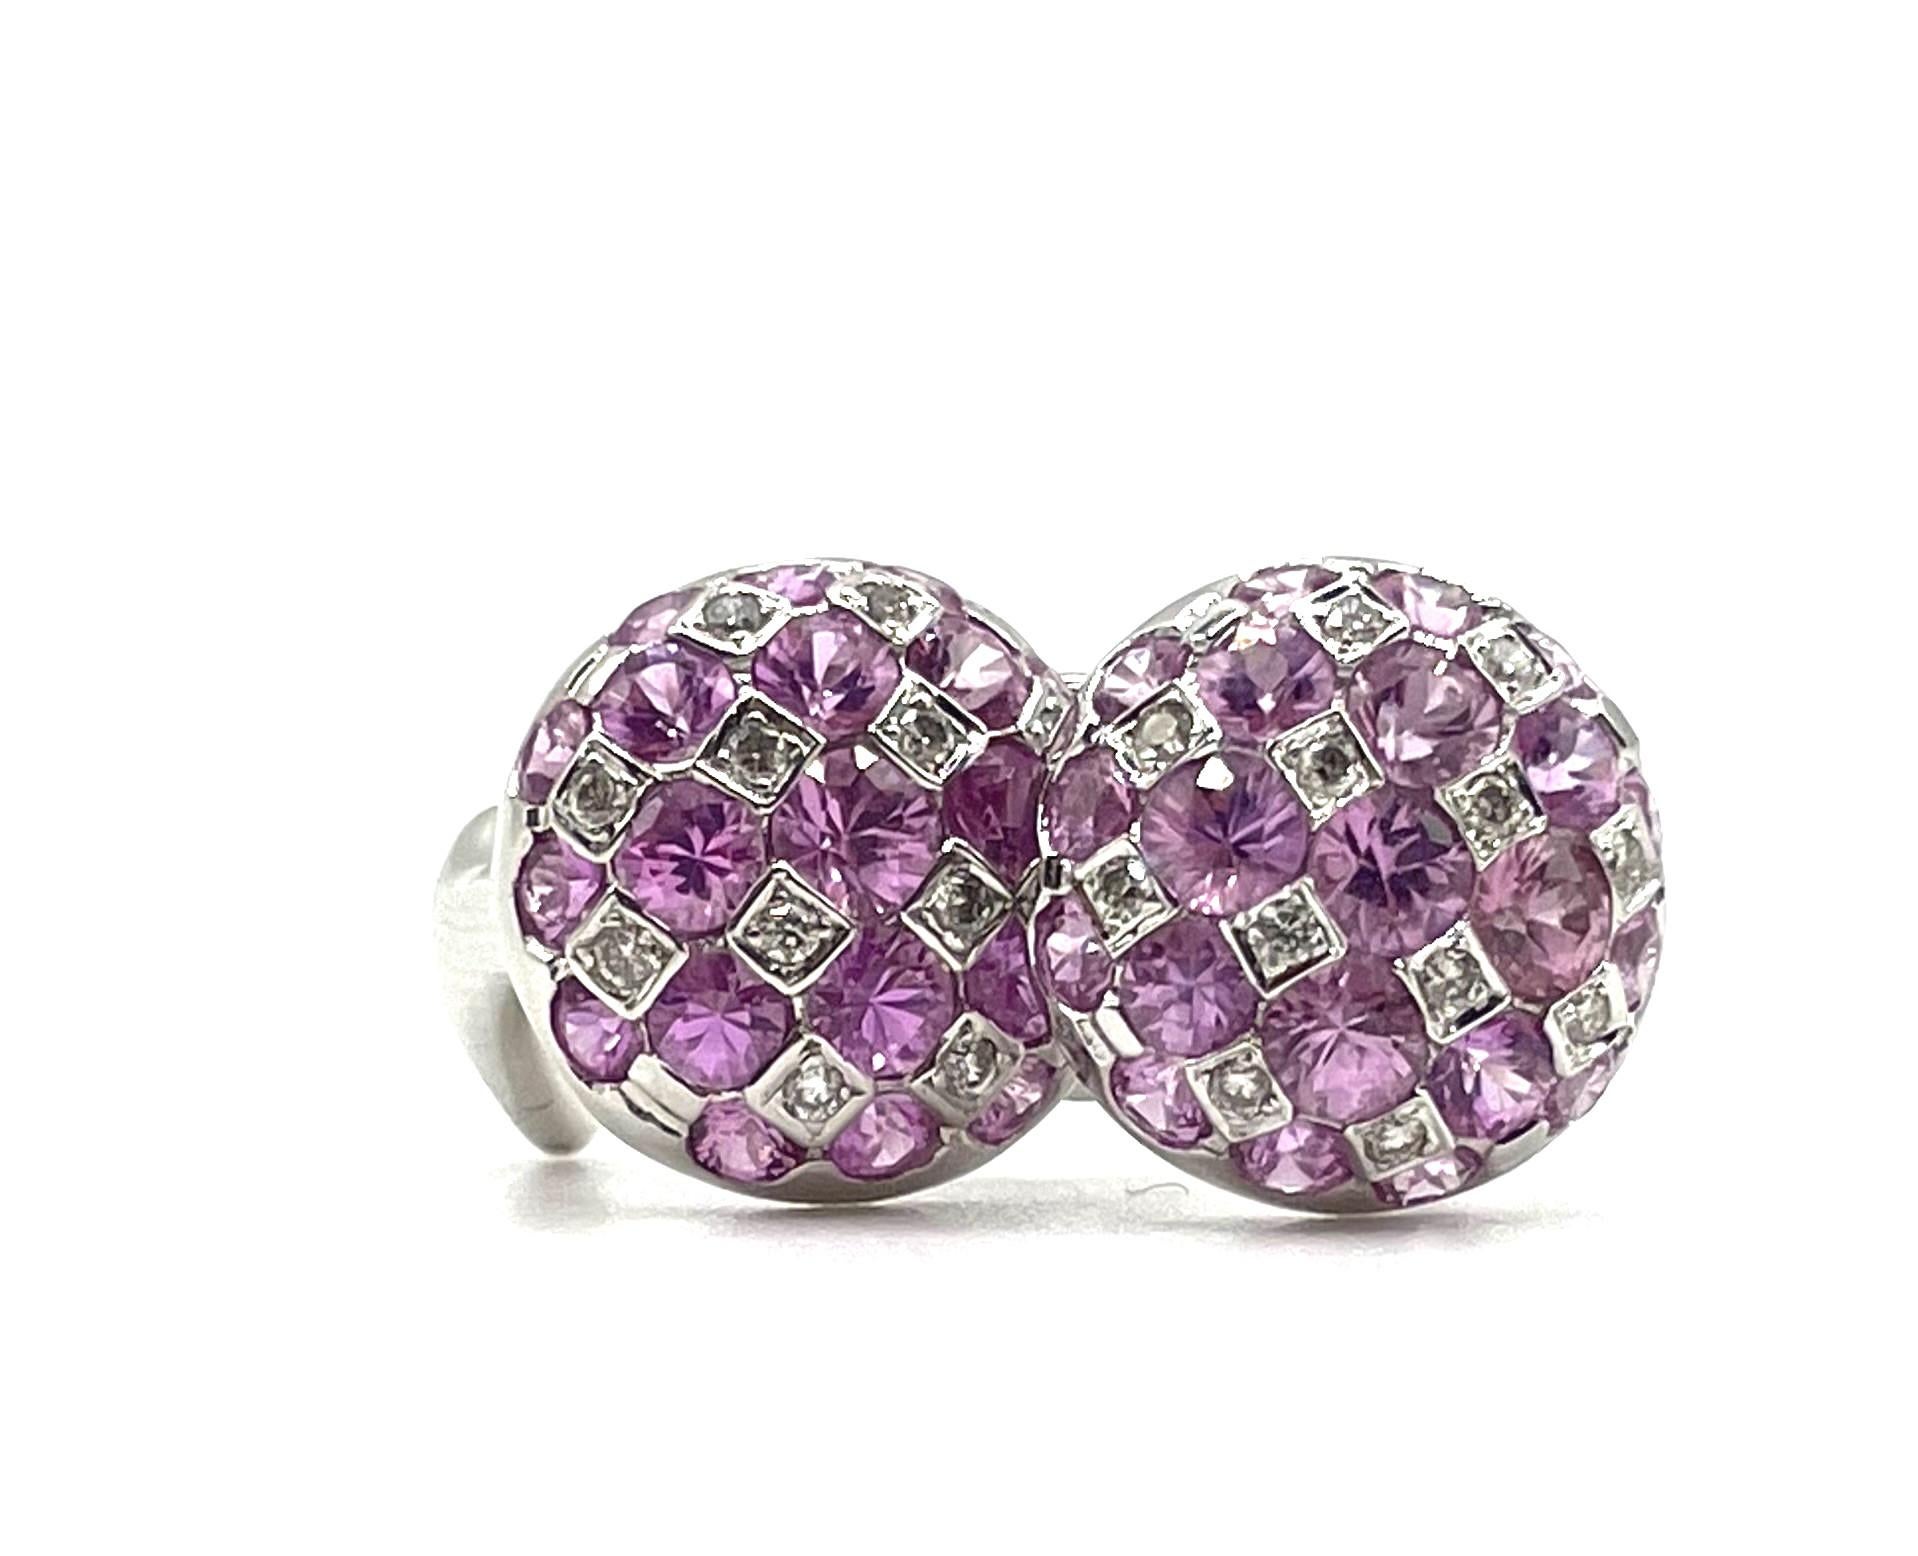 A pair of 18kt white gold, natural pink sapphire and natural diamond checkerboard earrings with straight post and omega clip system. Beautiful to wear on any occasion.

42 natural pink sapphires 3.30ct total weight

24 brilliant cut diamonds 0.26ct